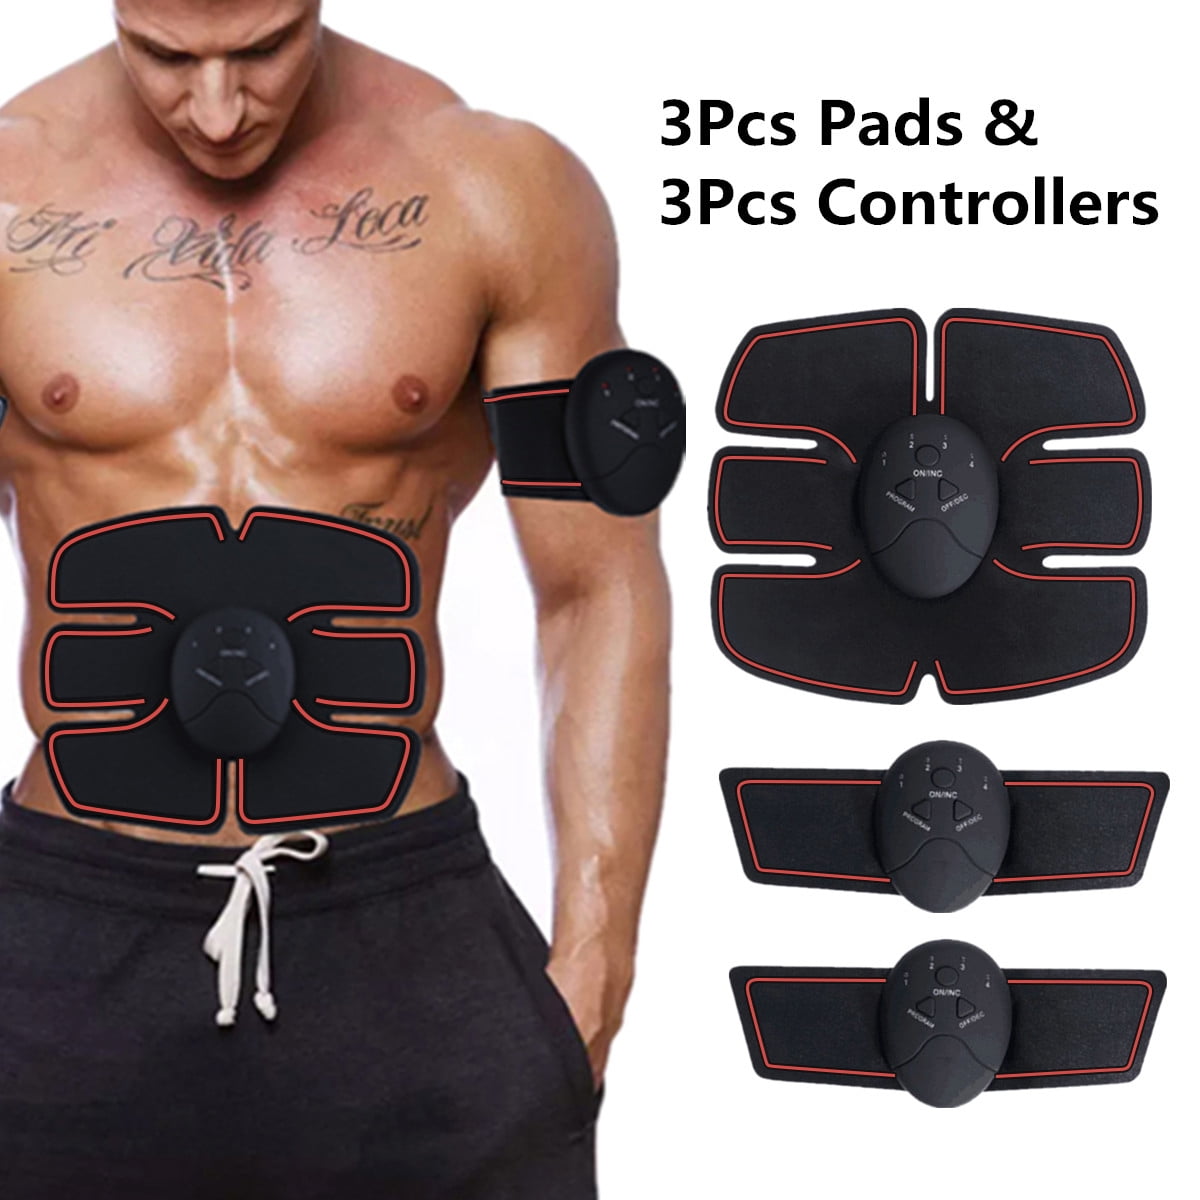  FOPIE Intelligent Wireless Fitness Apparatus, ABS Stimulator, Abdominal  Toning Belt Portable Ab Toner Waist Trainer Fitness Trimmer Workout  Equipment for Home NFB-6 : Sports & Outdoors